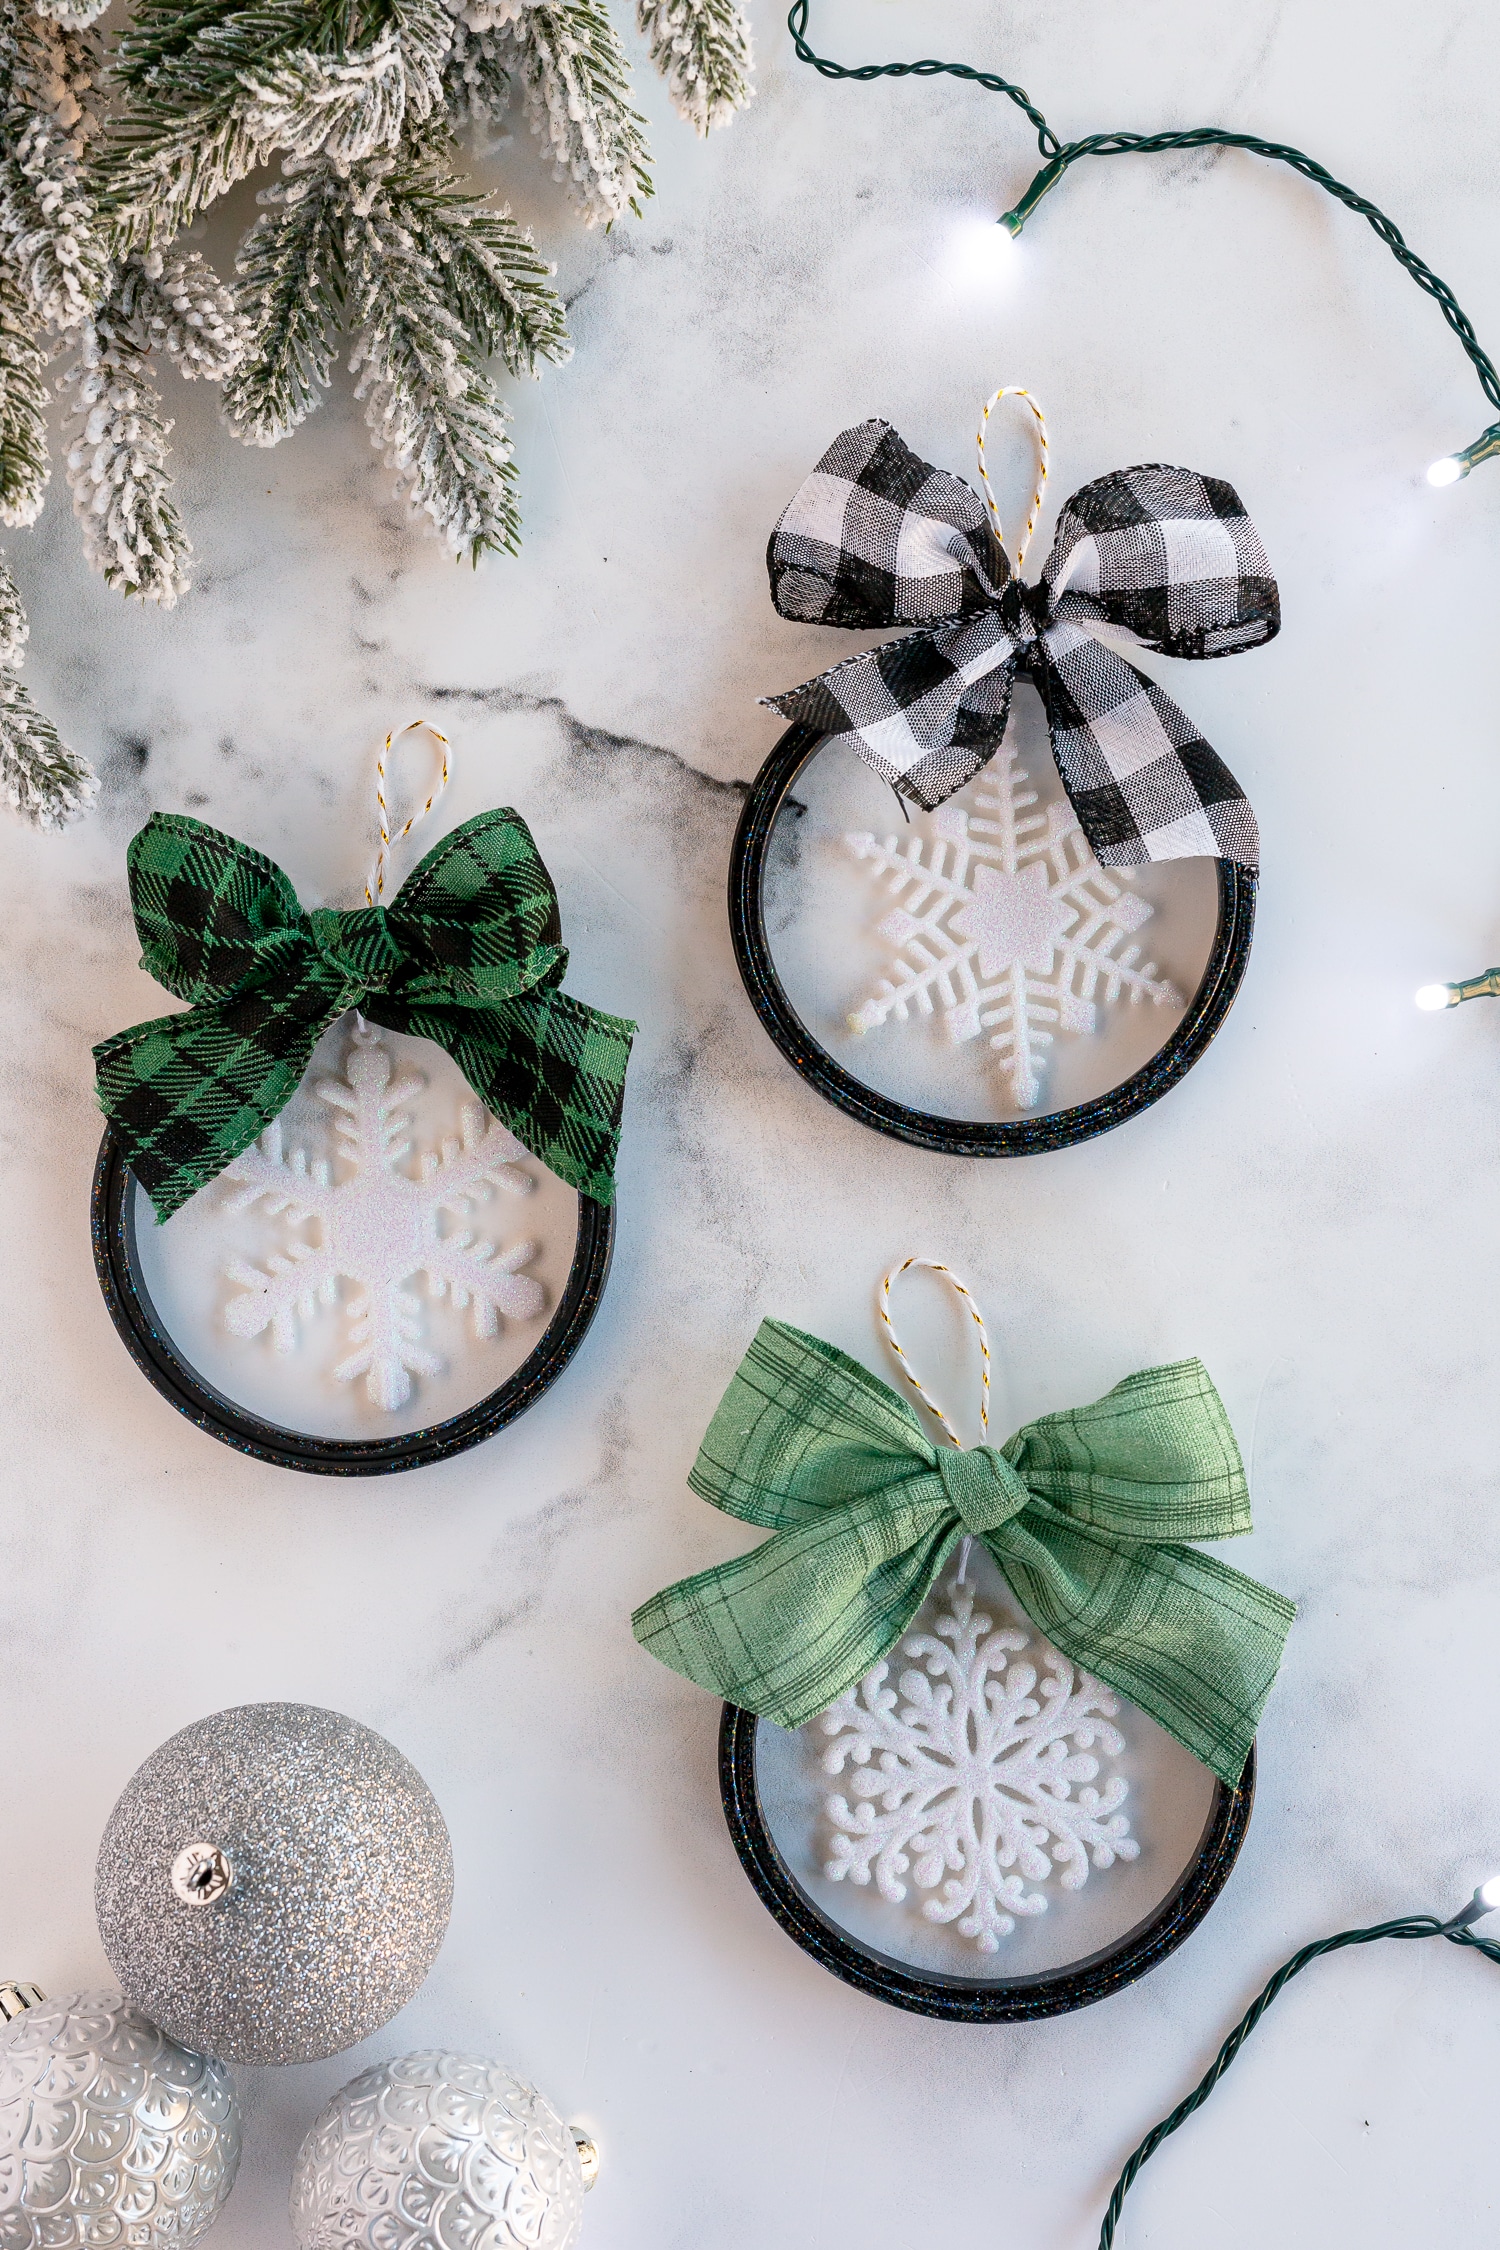 hoop ornaments with ribbon and plastic snowflakes